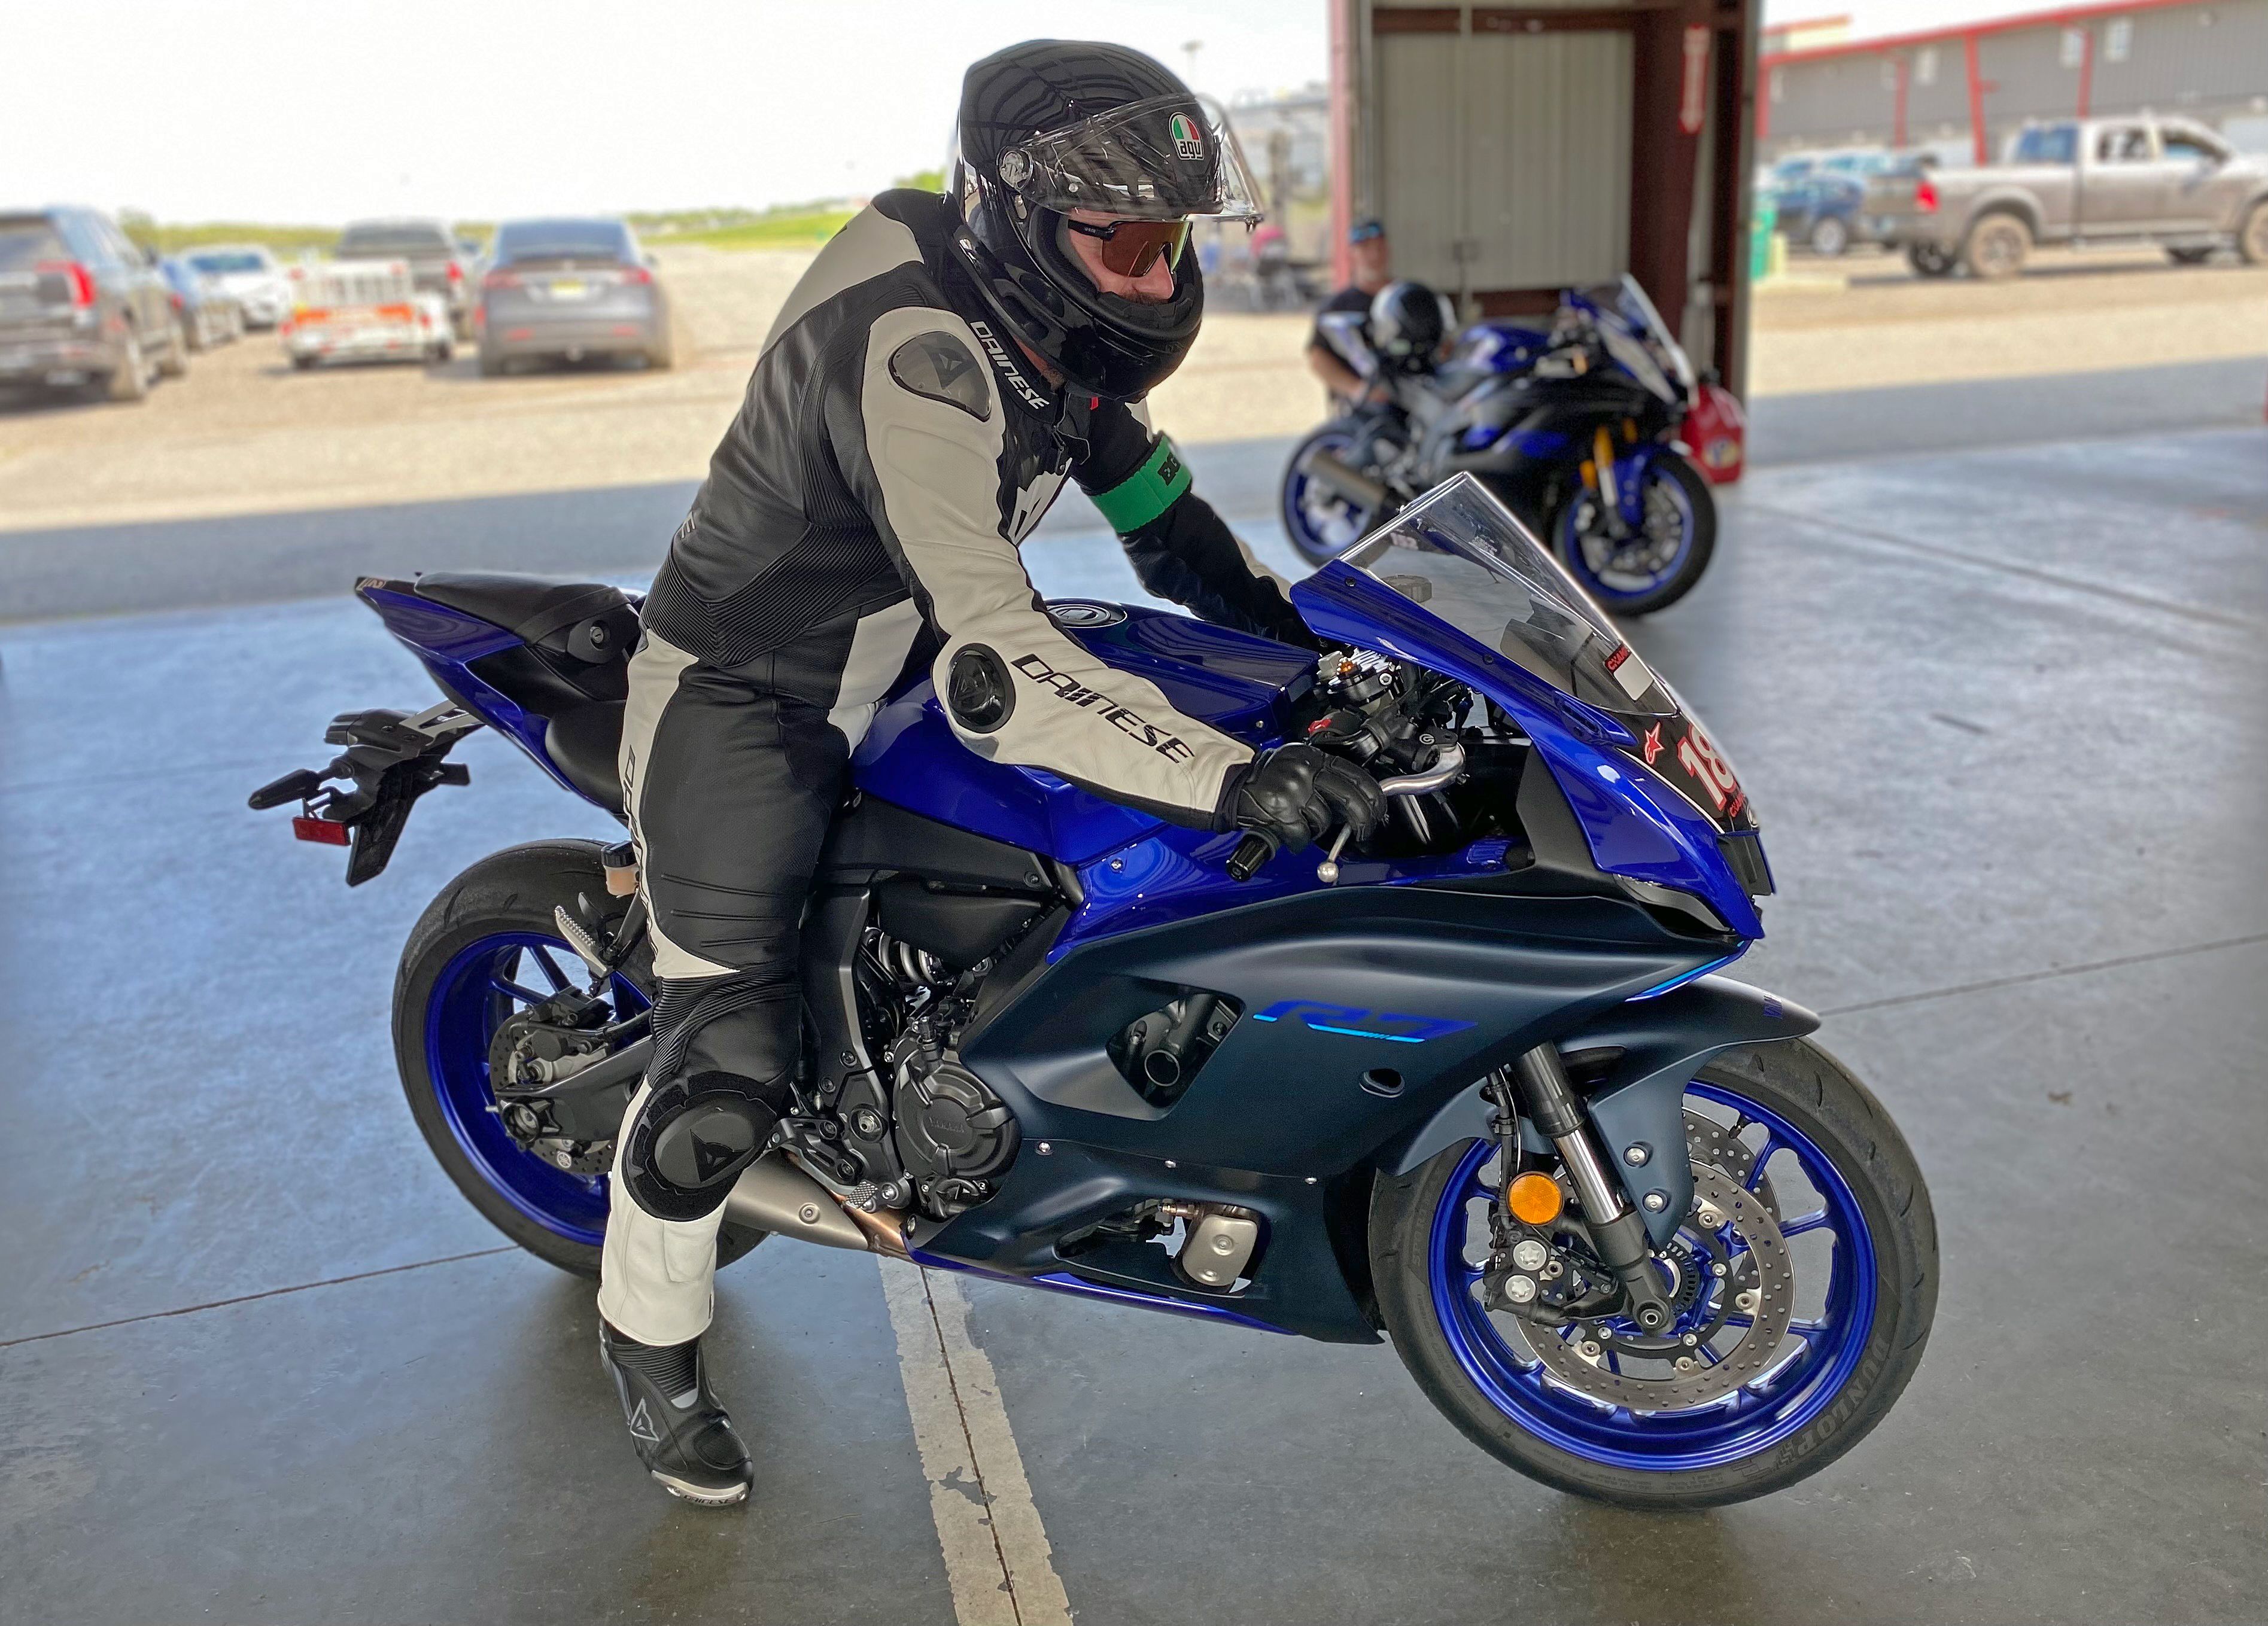 2022 Yamaha YZF-R7 Motorcycle Review: a $9,000 Breath of Fresh Air